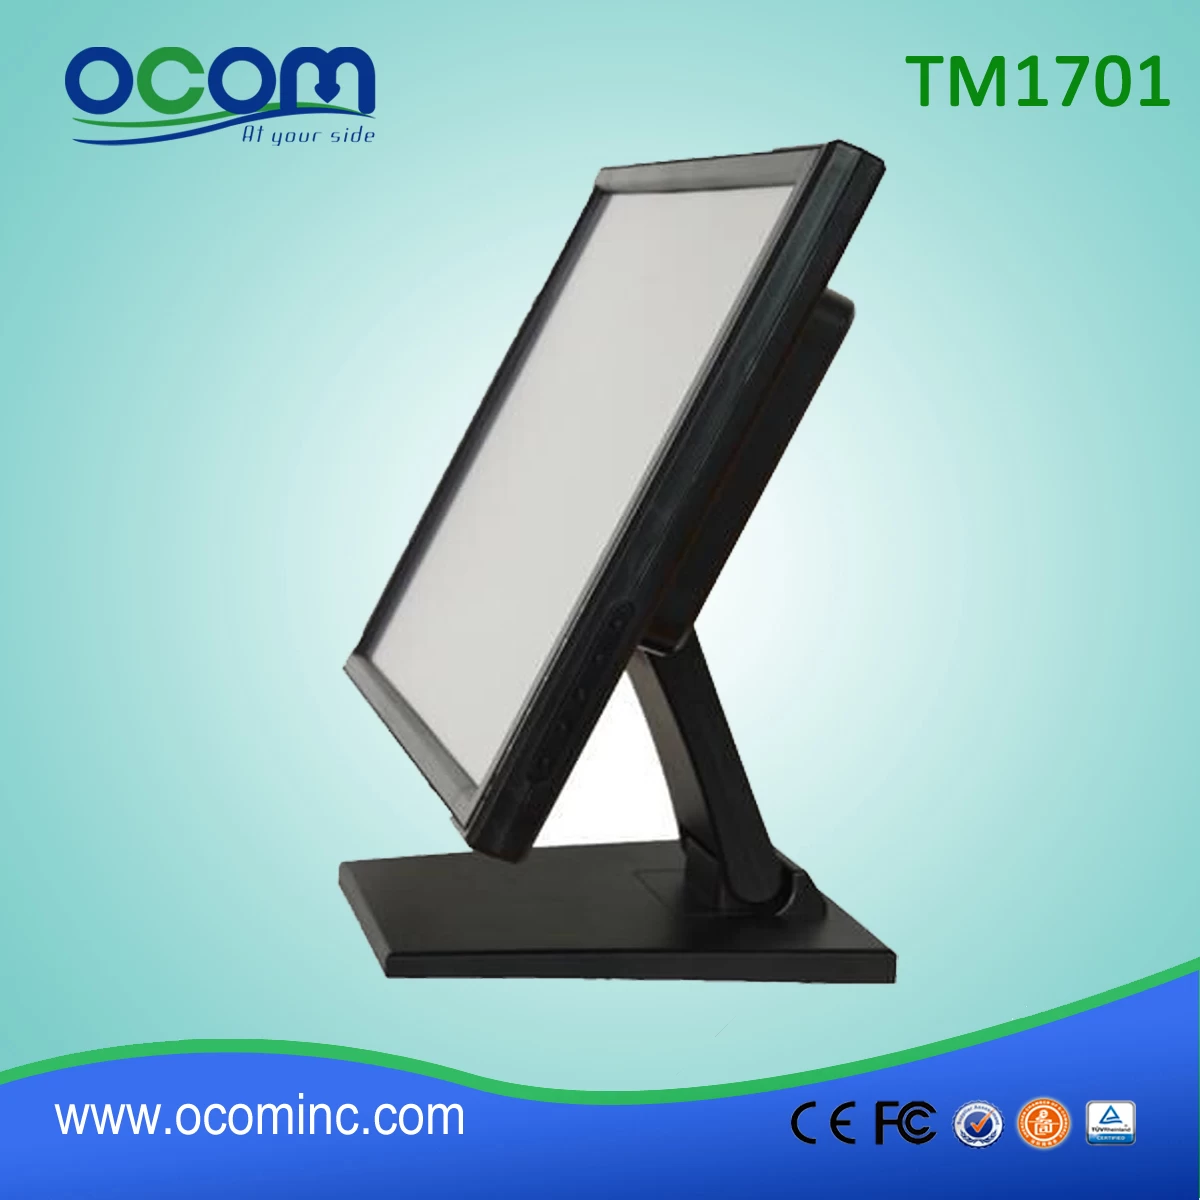 TM1701 17inch LCD Touch Screen POS Monitor